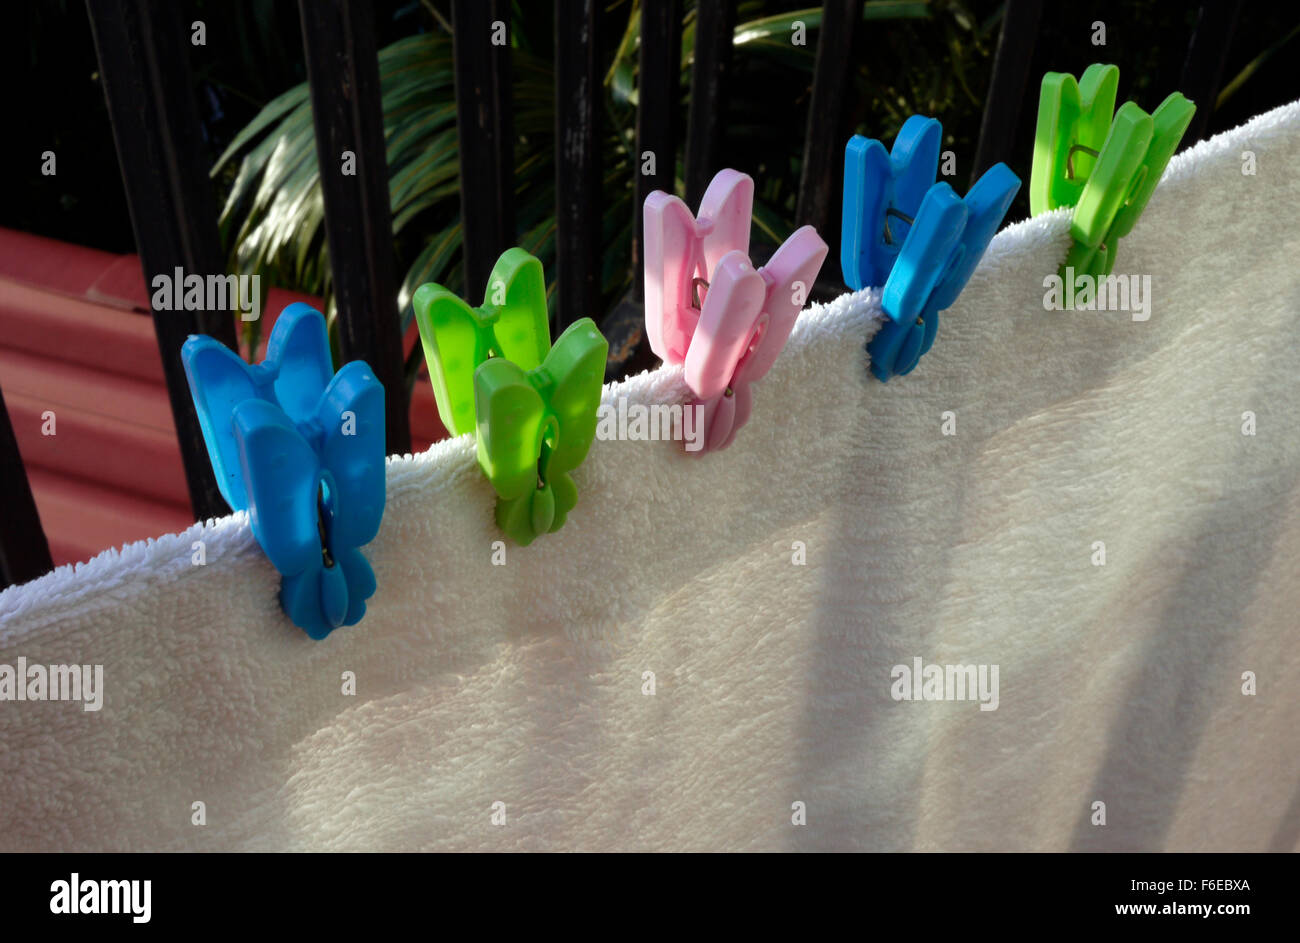 A white towel drying on a hotel balcony gripped with plastic clothes pegs Stock Photo